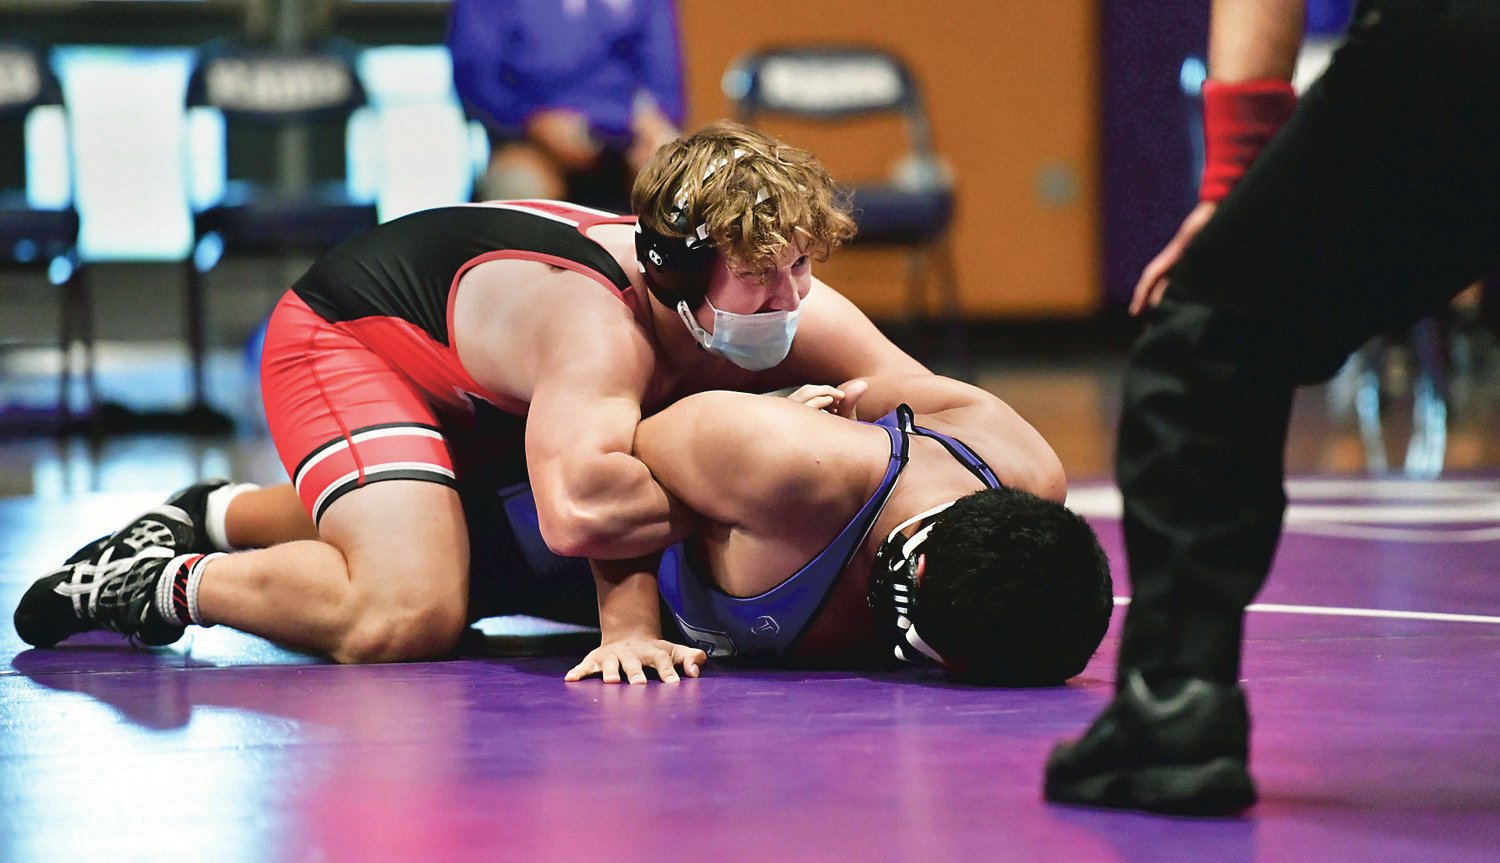 Yelm High School wrestler Cael Gendron, on top — a junior — wrenches down his North Thurston High School opponent on Wednesday, May 12, to win his match by pin.